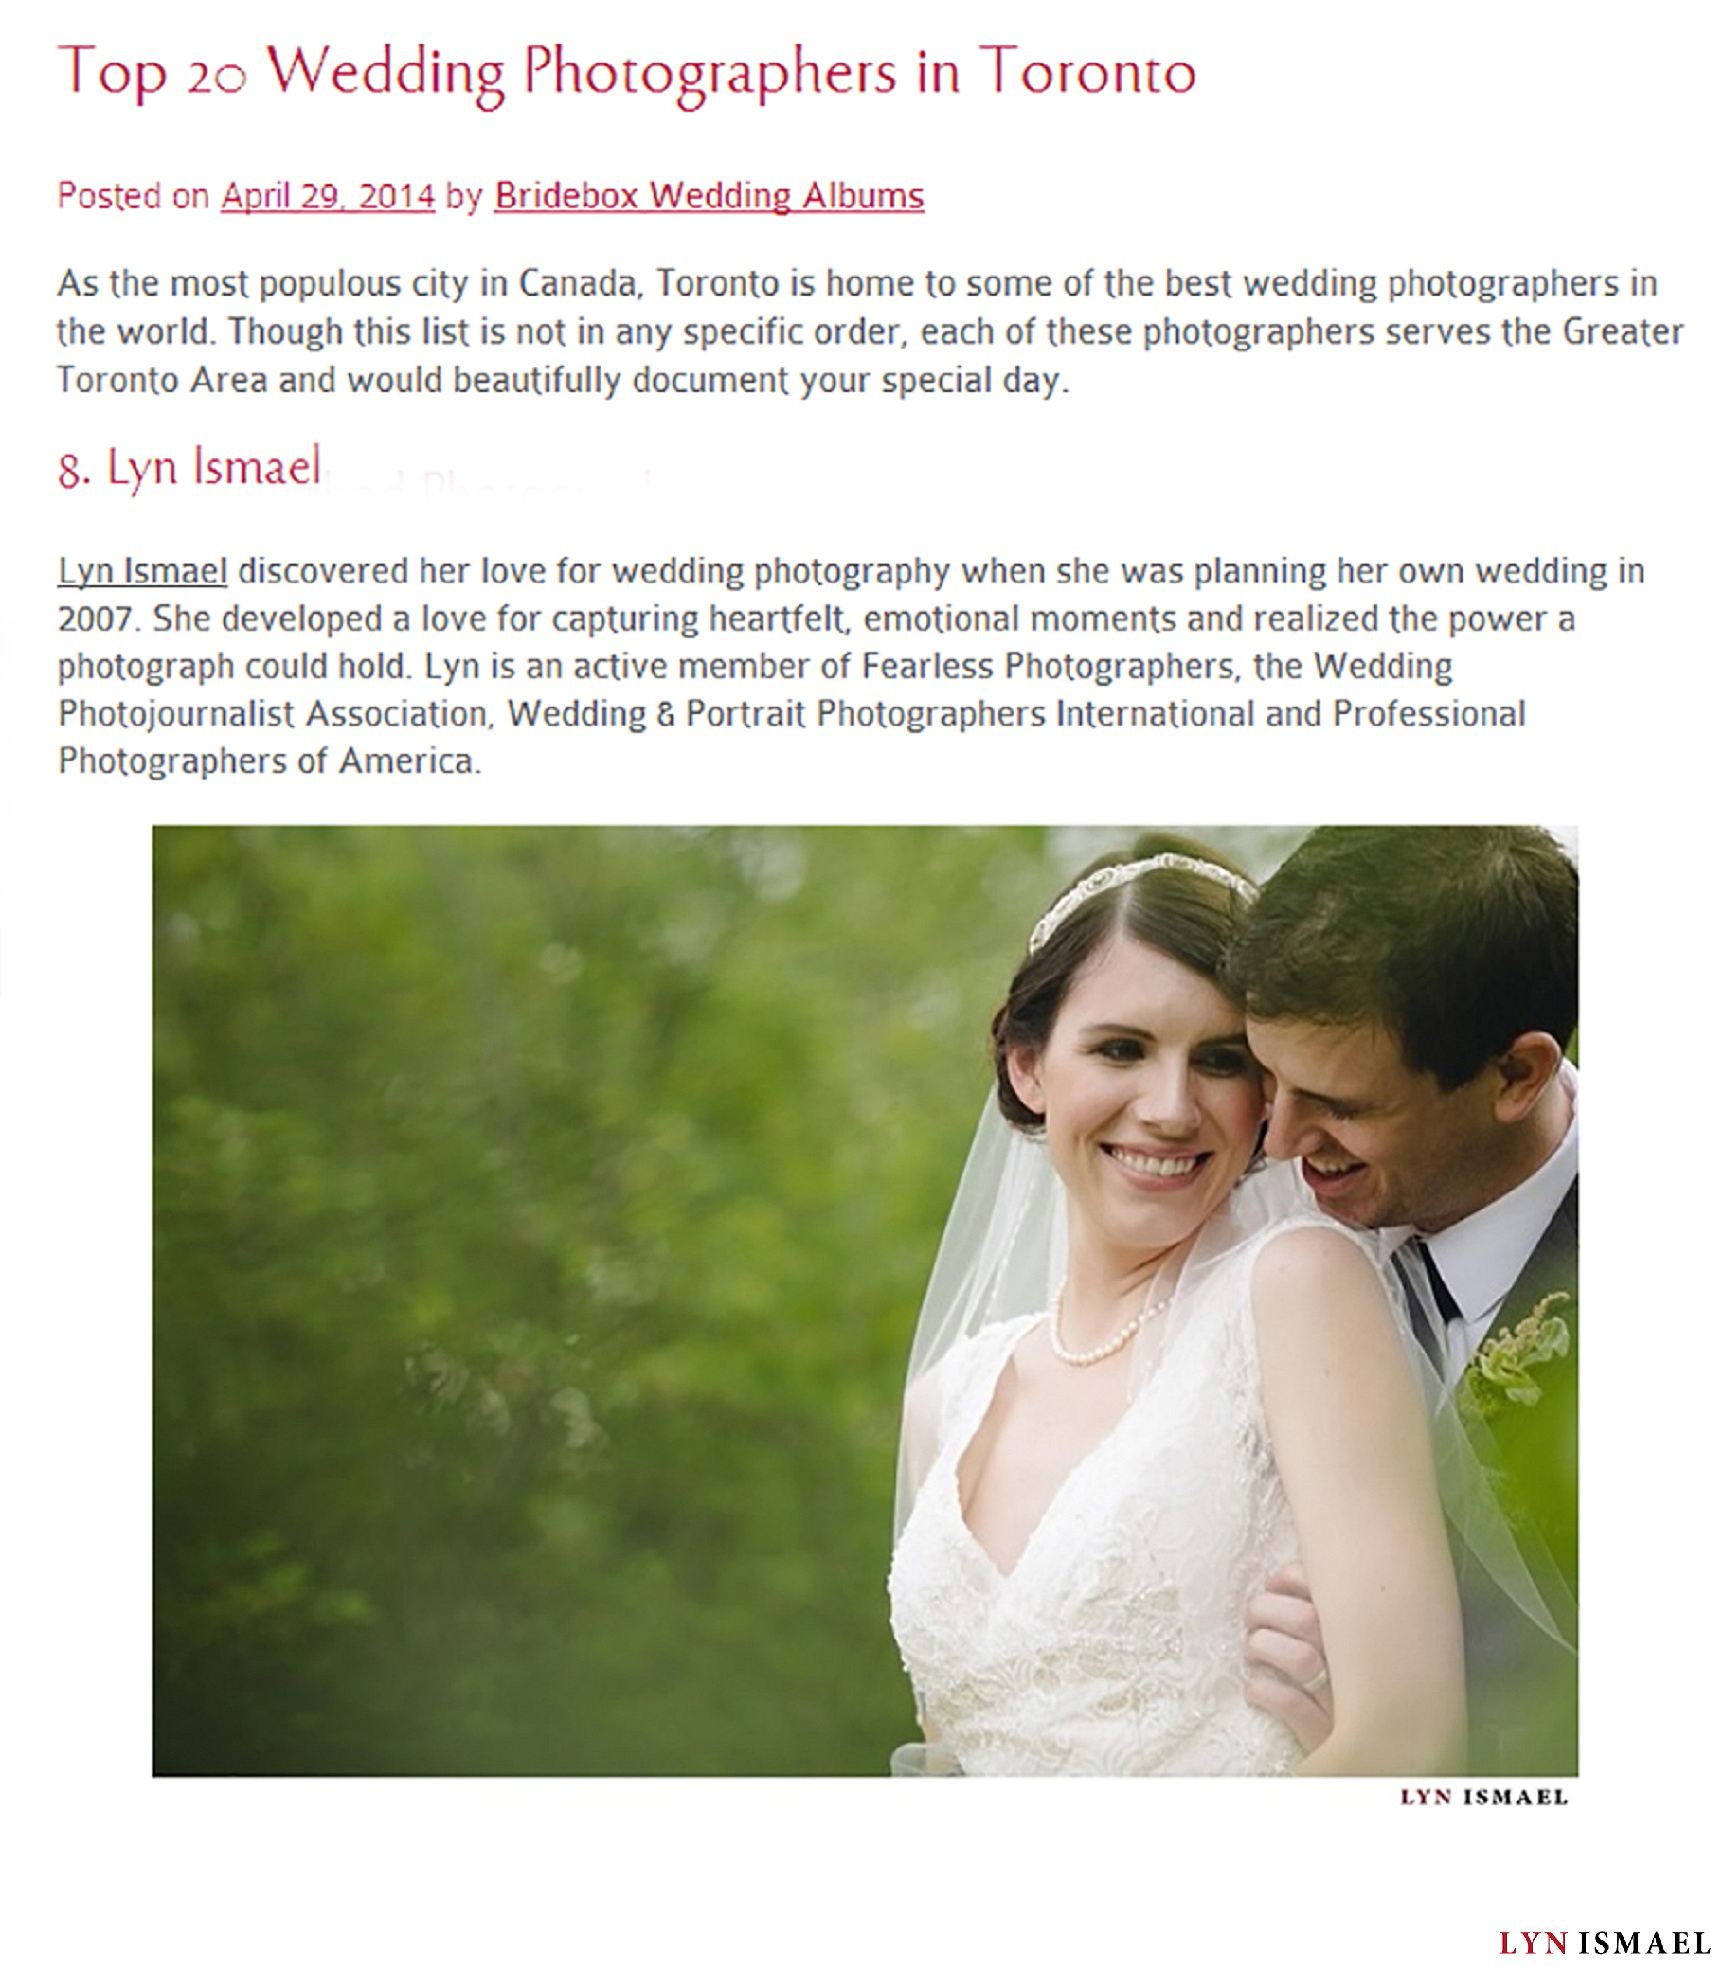 Voted #8 in Top 20 wedding photographers in Toronto